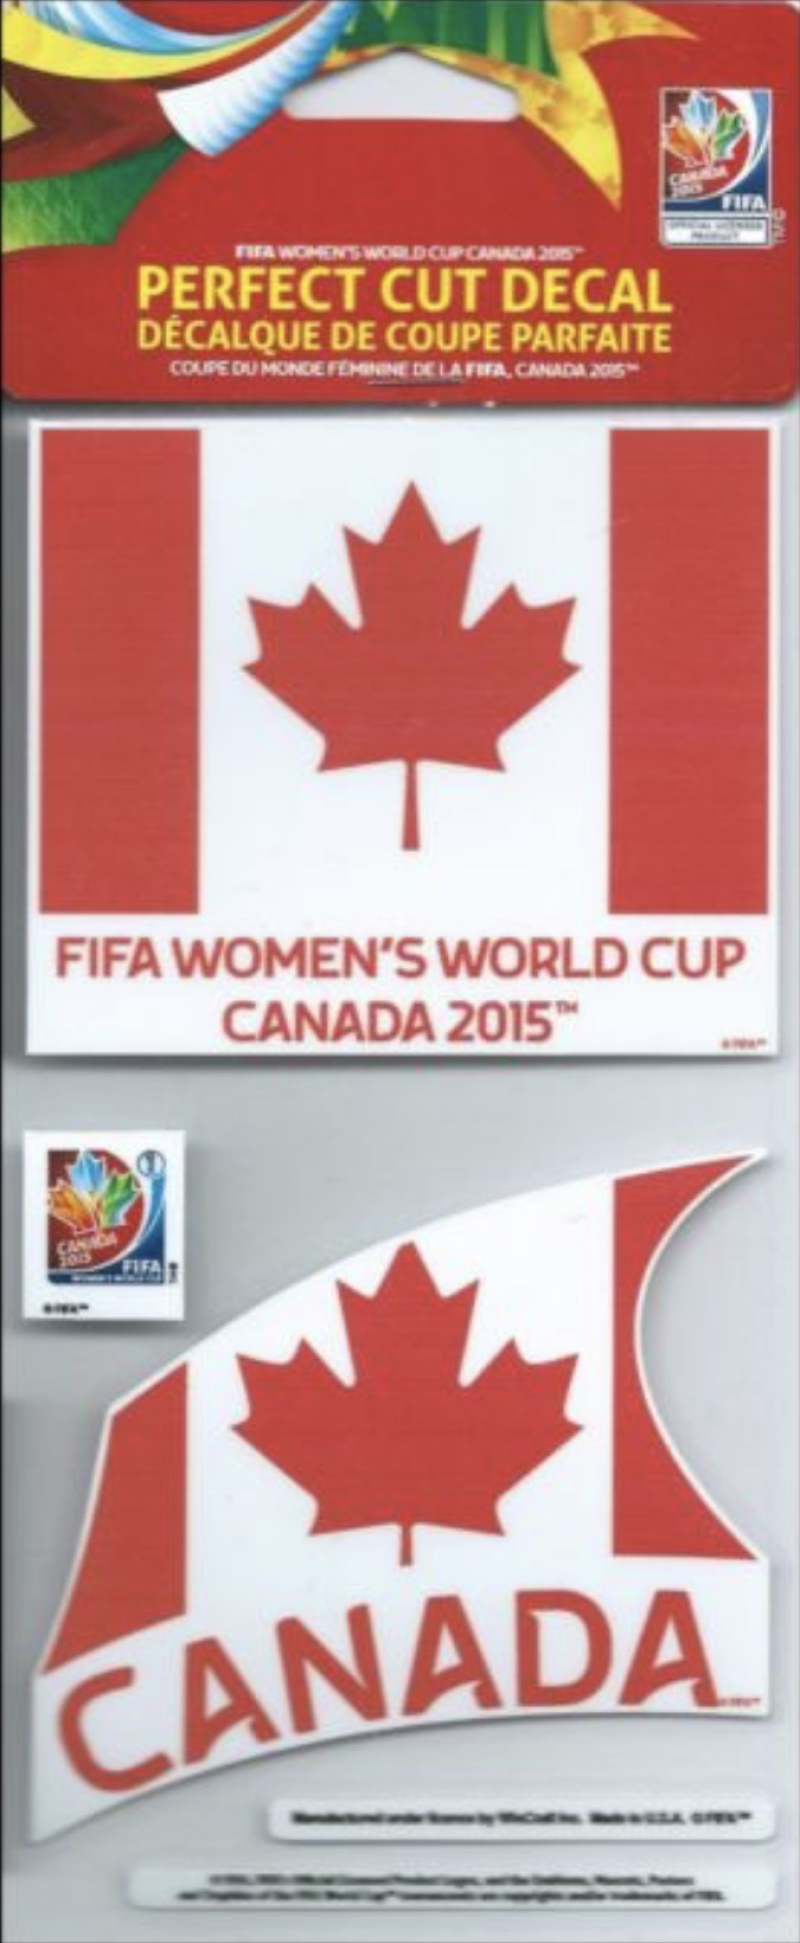 Canada Fifa World Cup Women's Perfect Cut Decal/Sticker Set of 2 4x4 Image 1